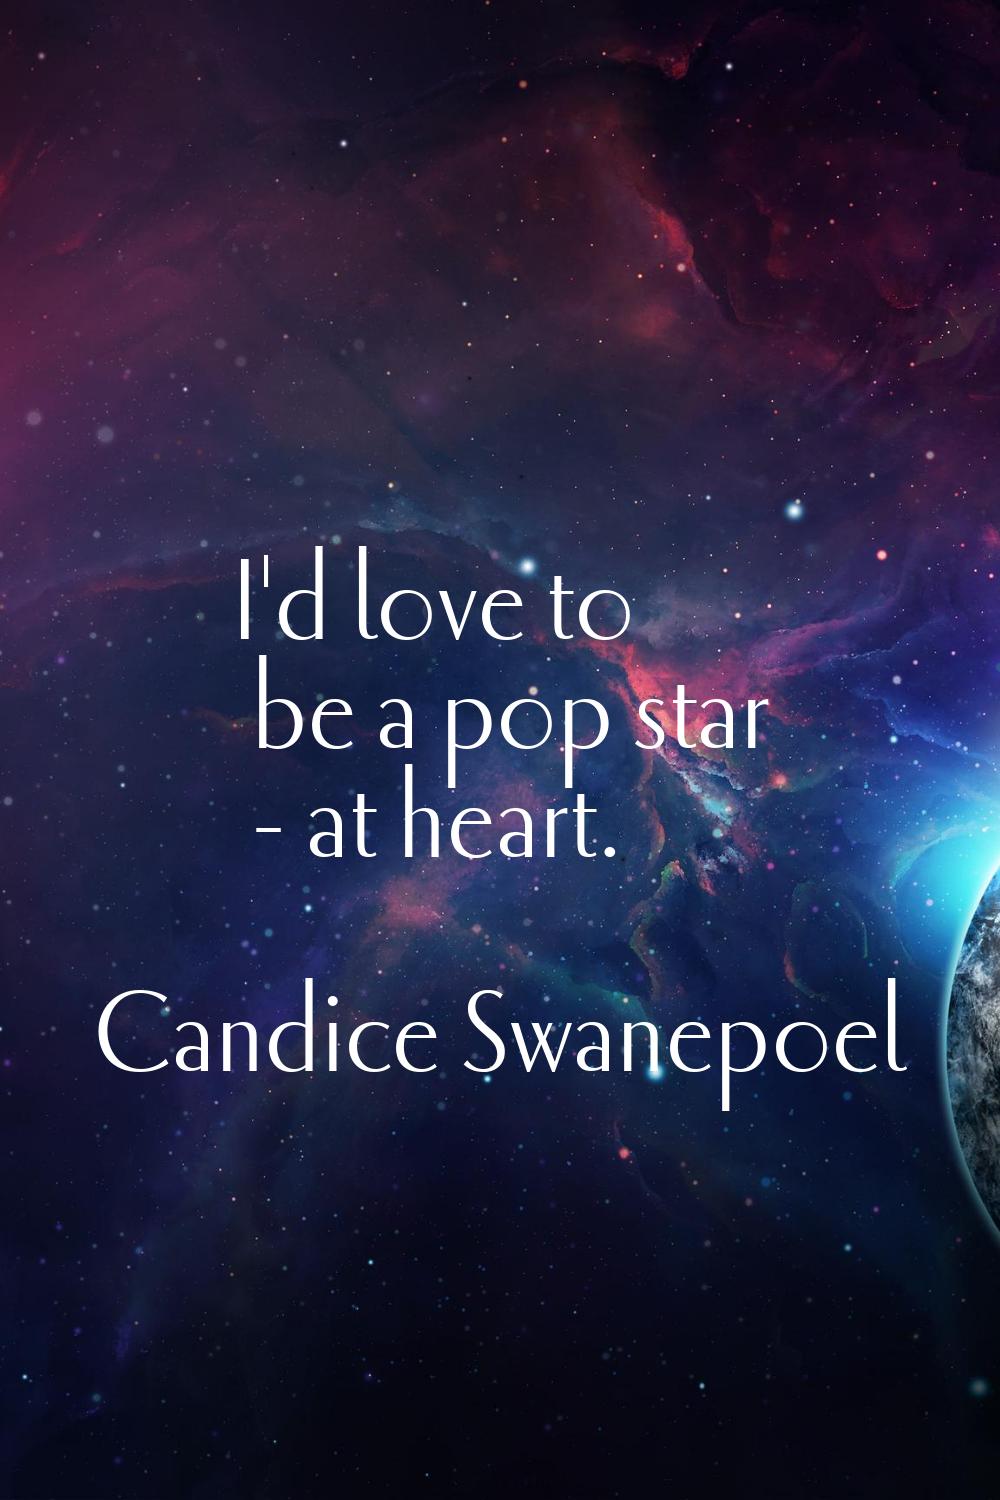 I'd love to be a pop star - at heart.